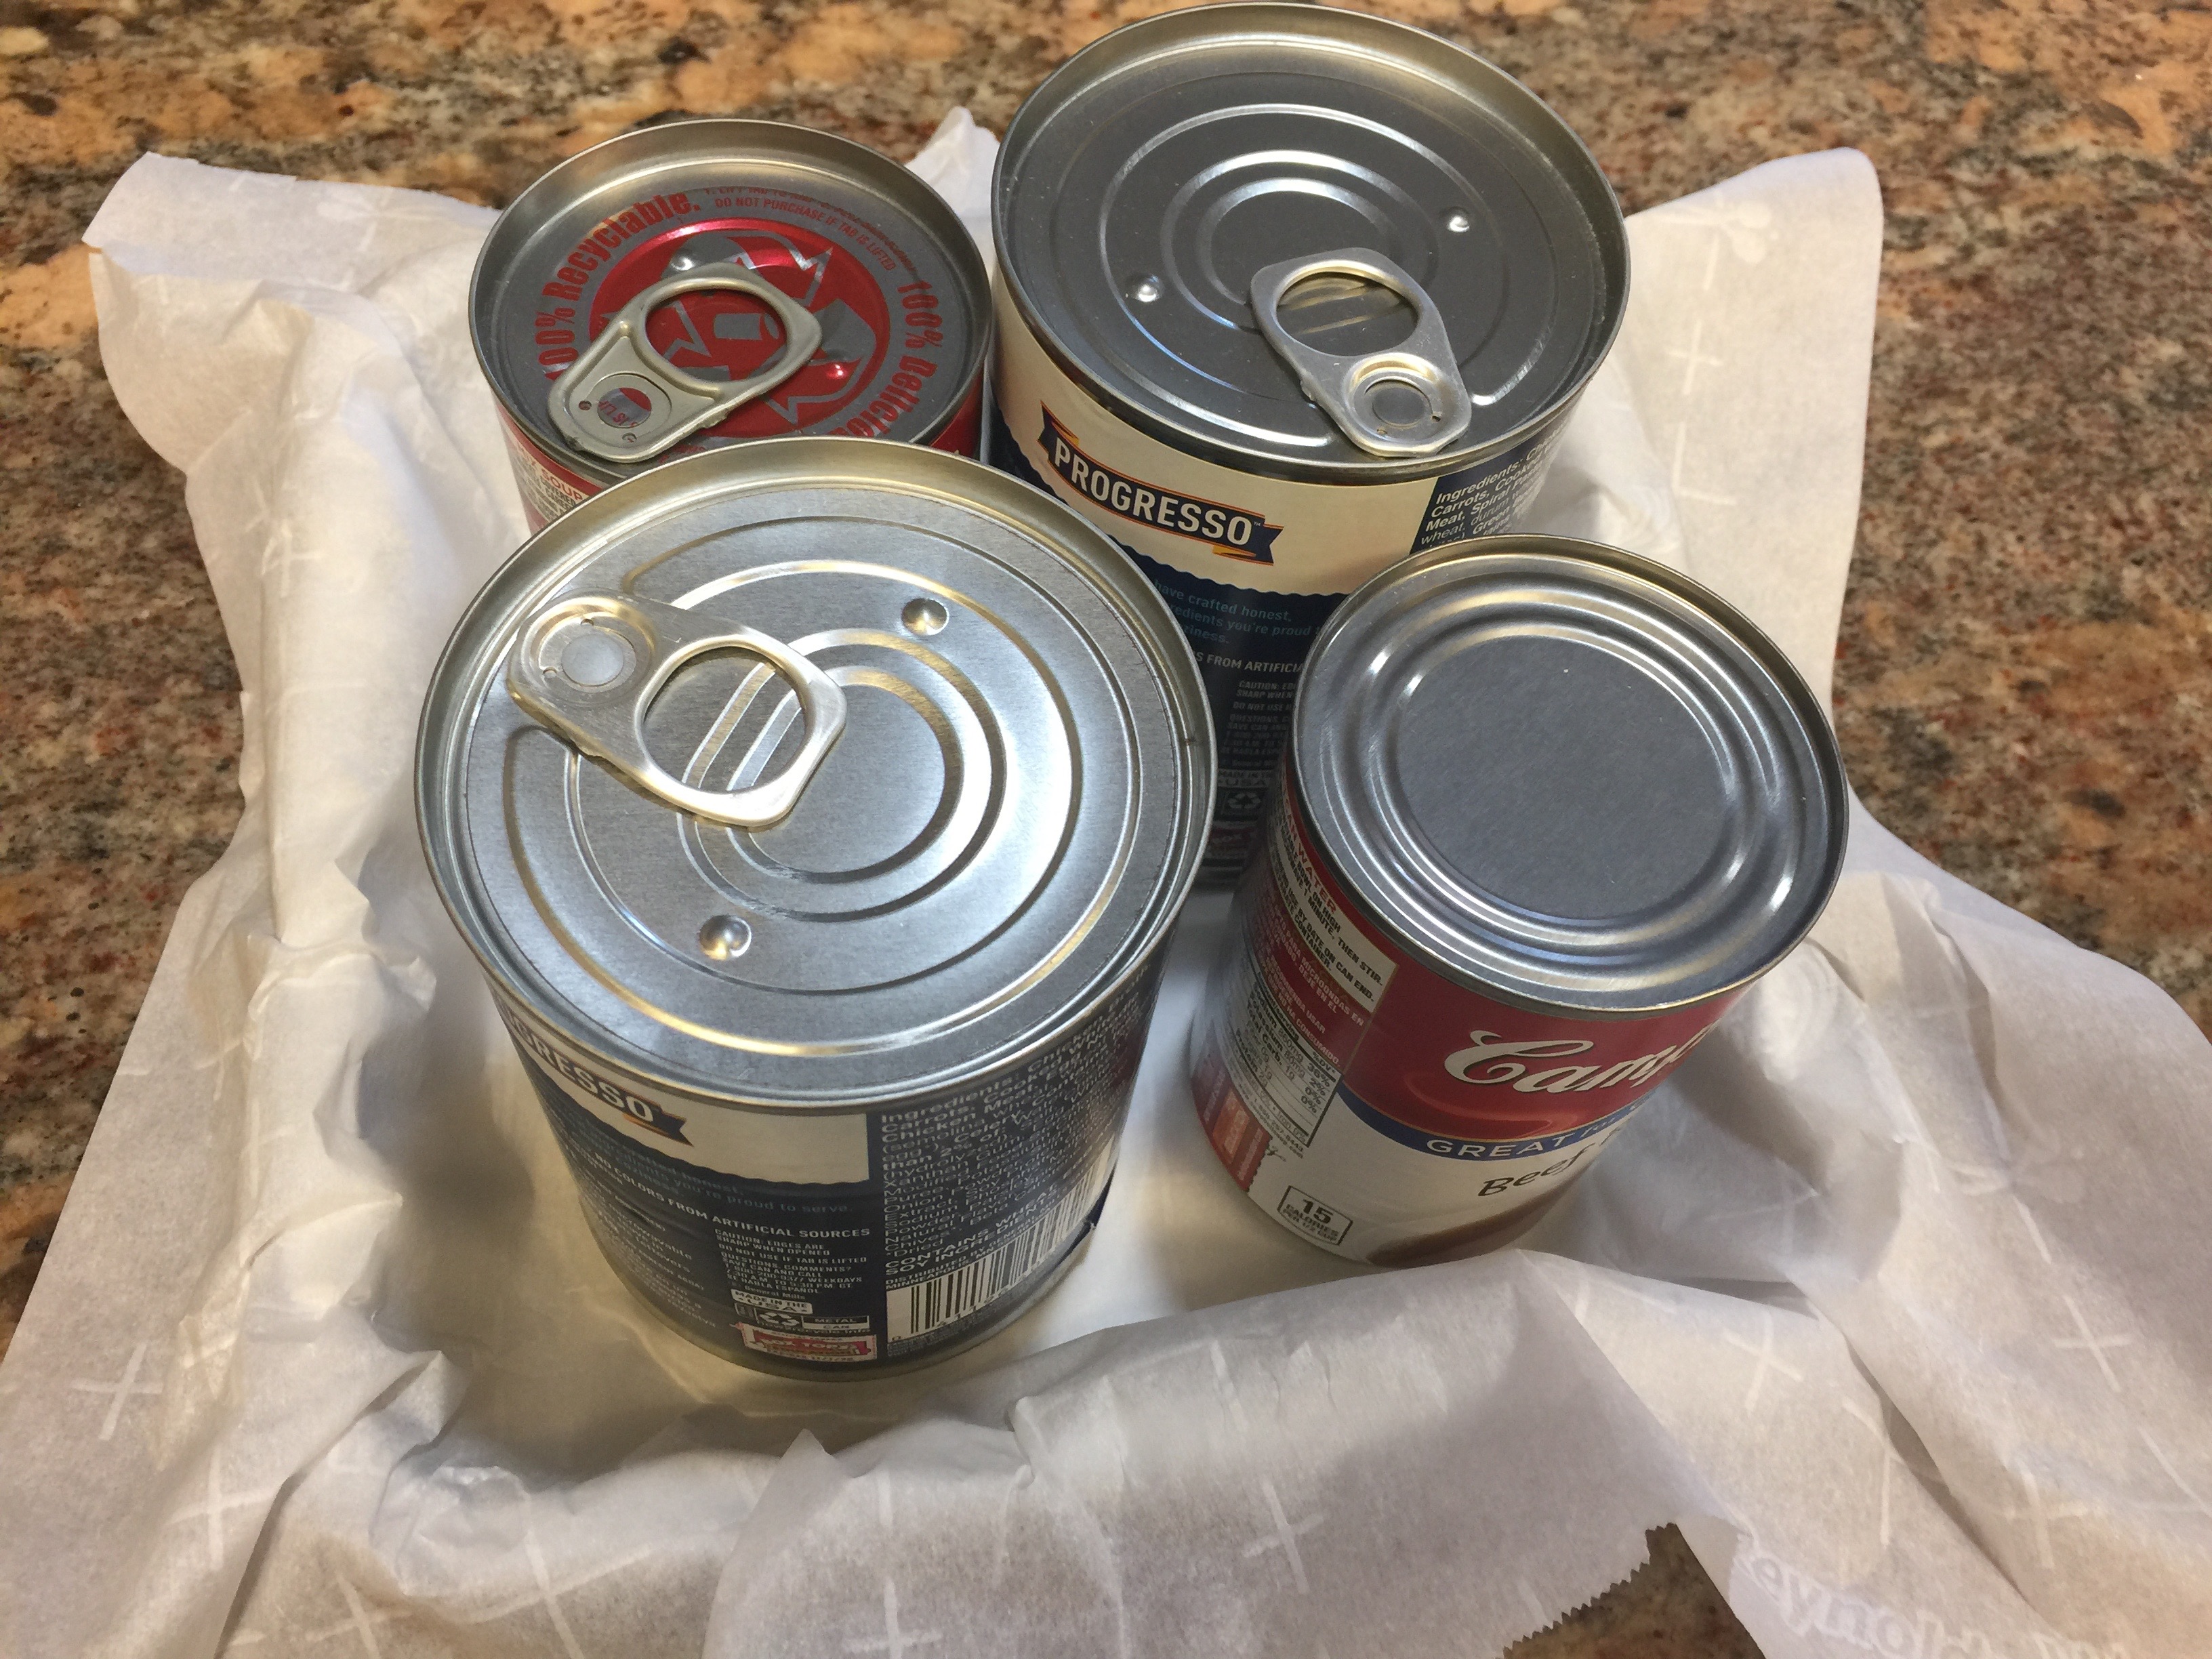 cans in the pan